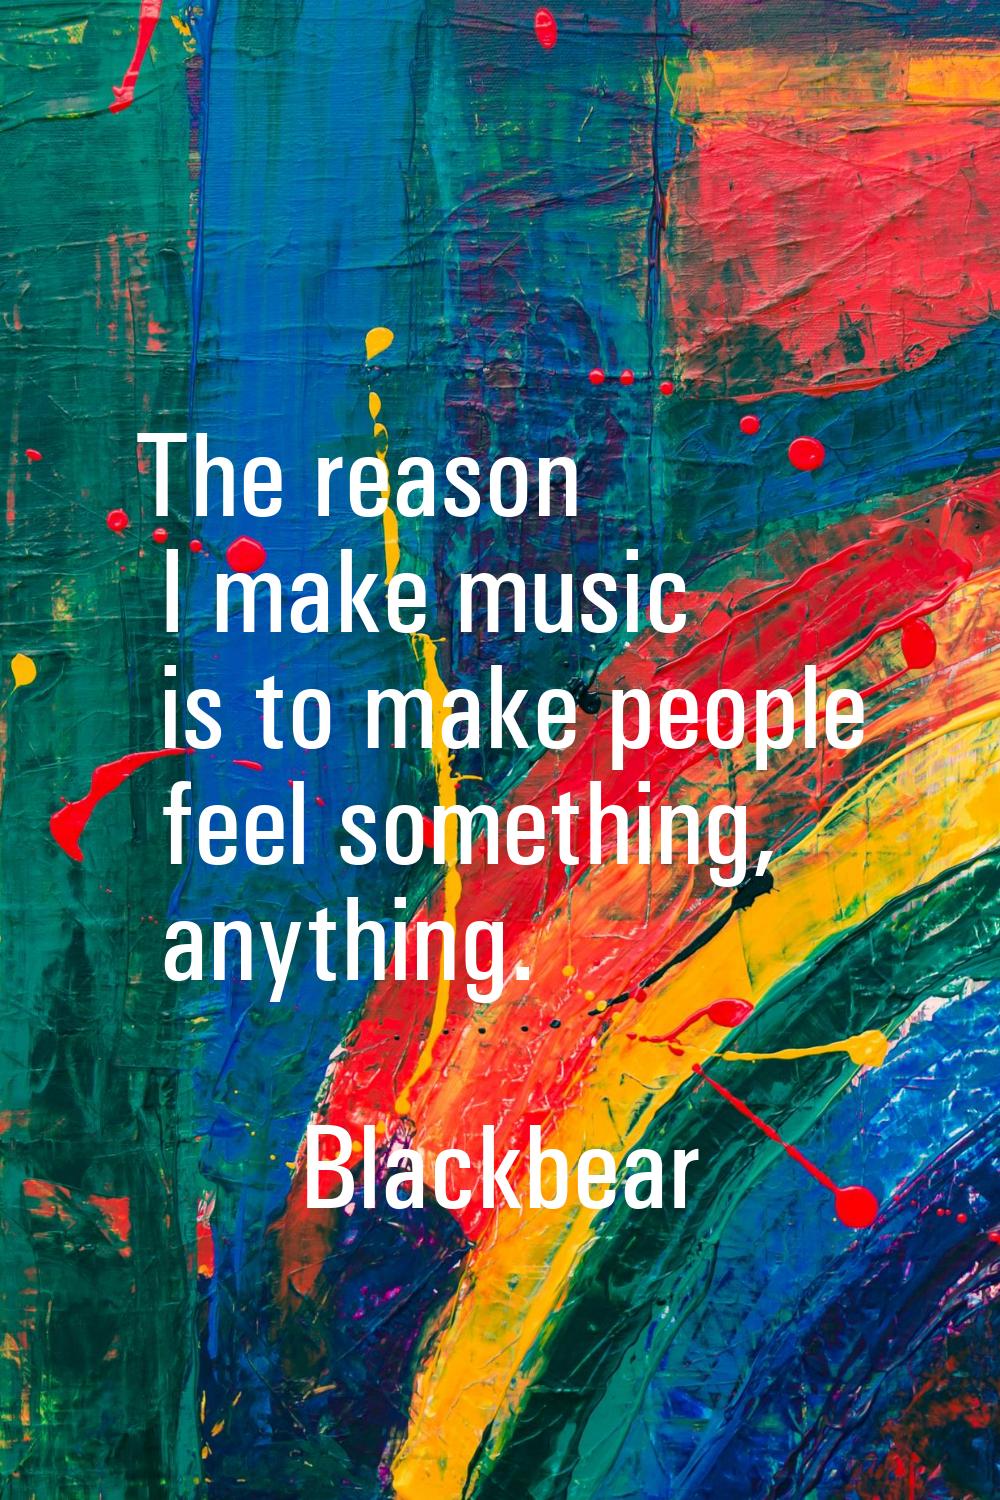 The reason I make music is to make people feel something, anything.